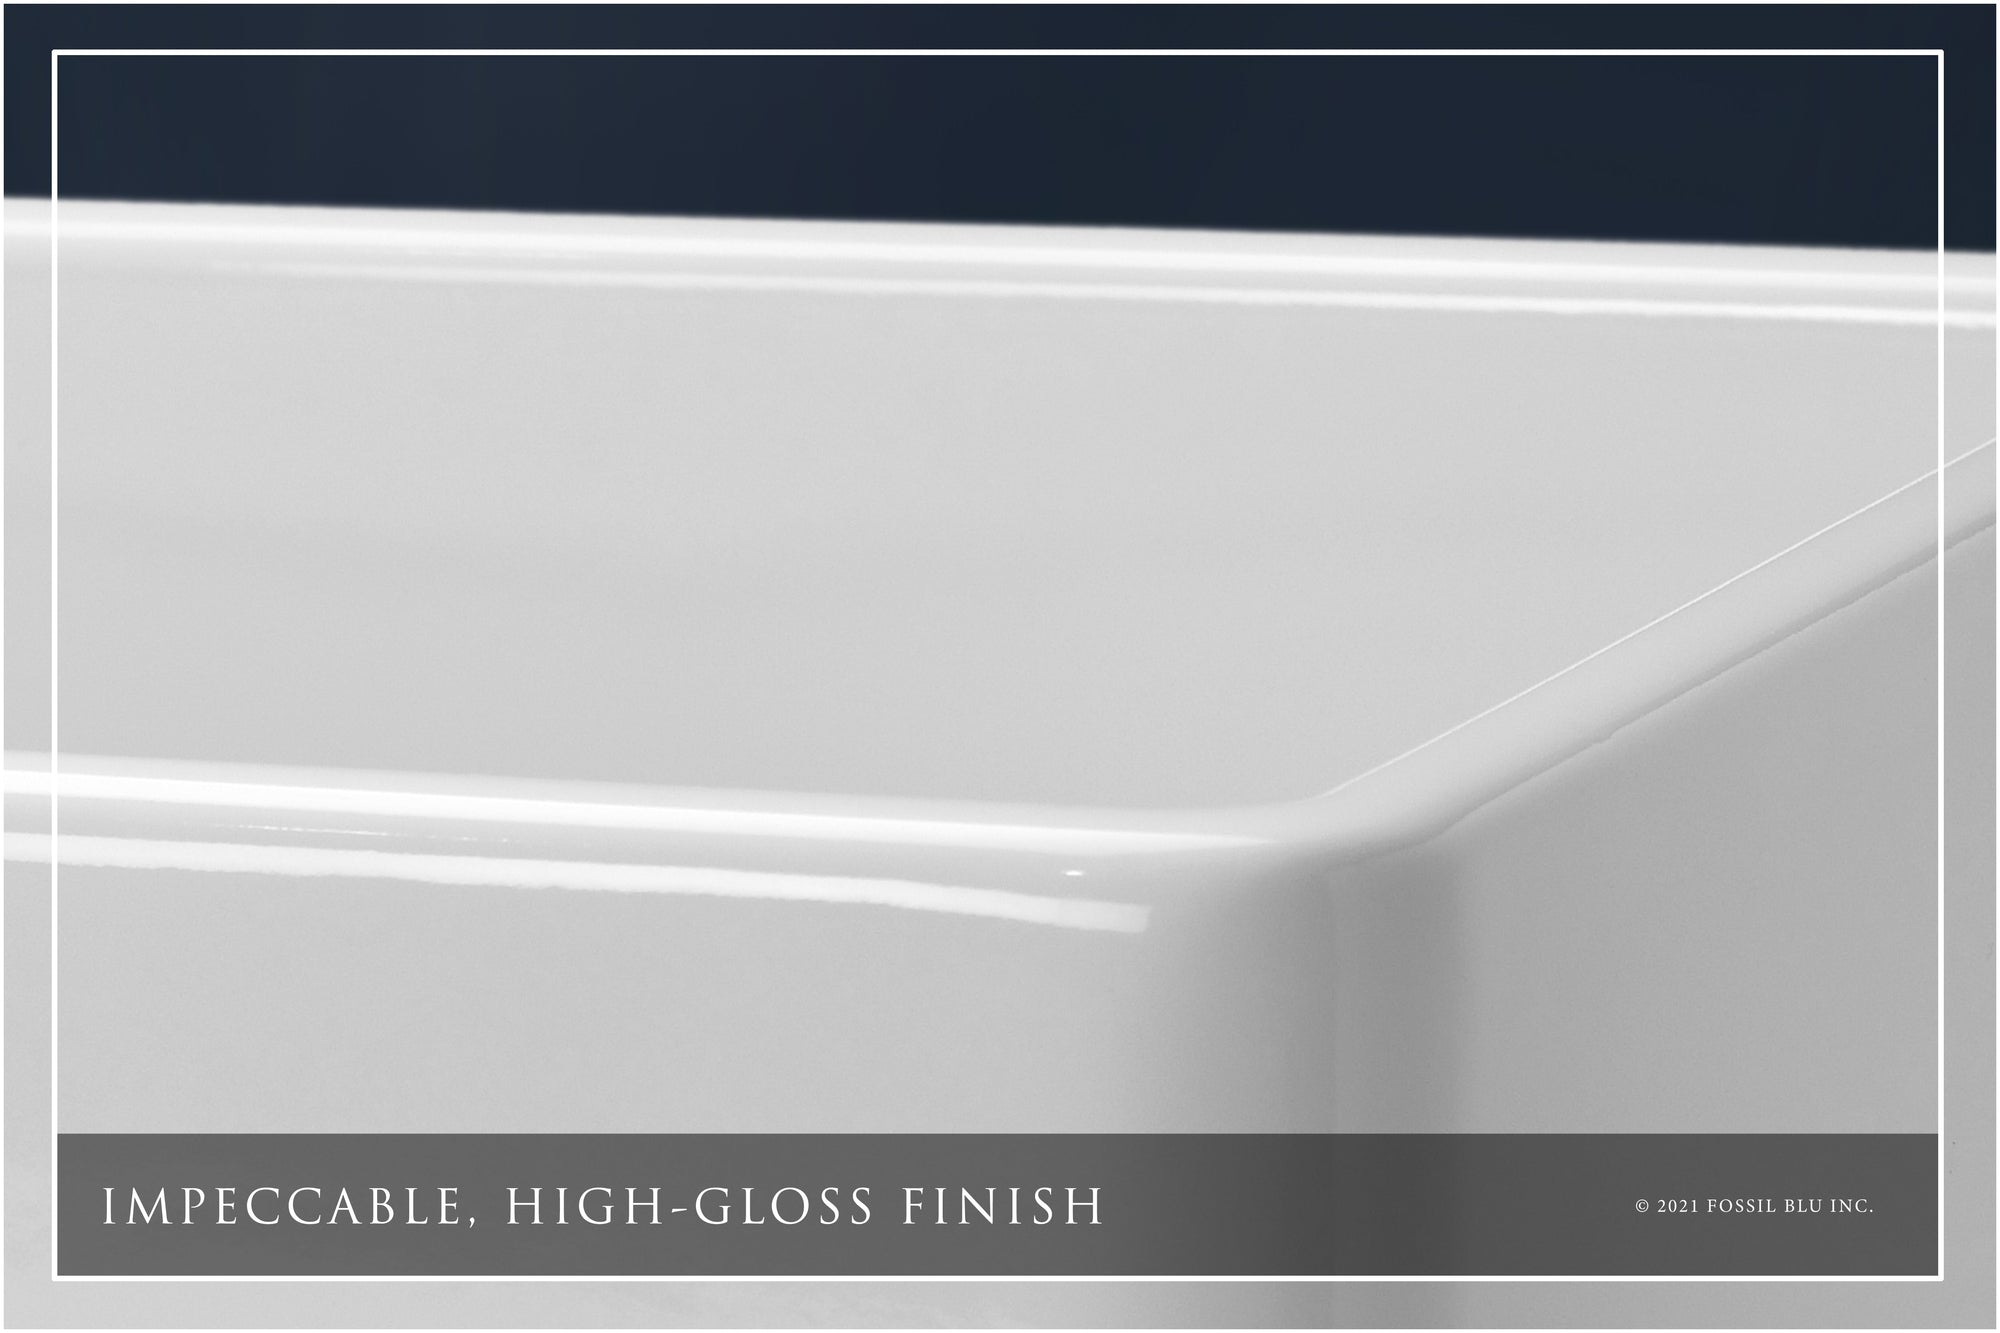 FSW1004 LUXURY 30-INCH SOLID FIRECLAY FARMHOUSE SINK IN WHITE, STAINLESS STEEL ACCS, BELTED FRONT